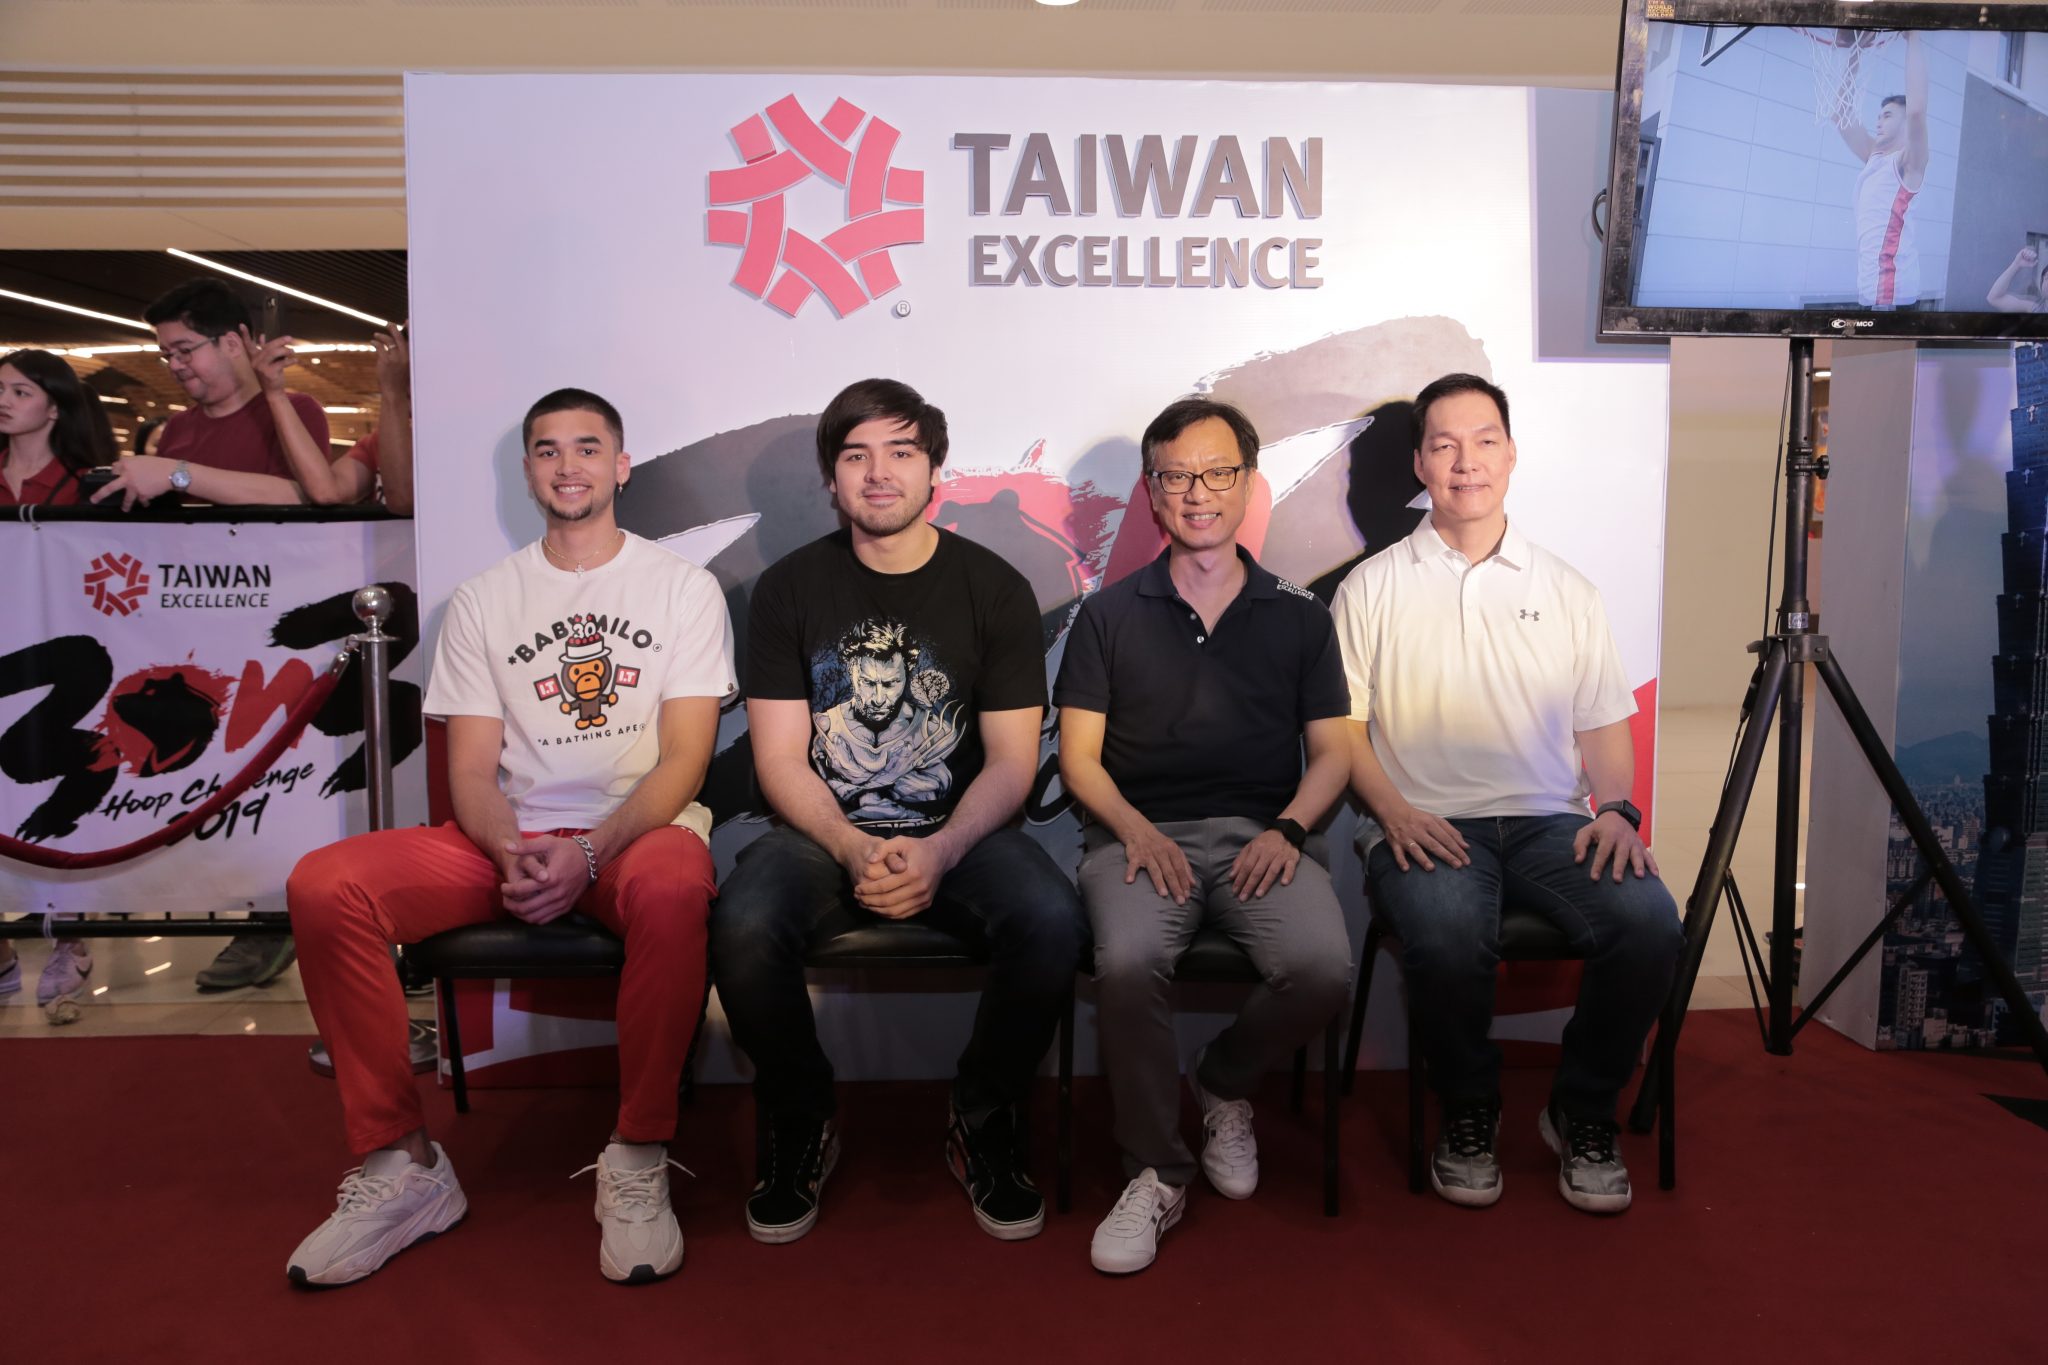 Kobe Paras and his brother Andre together with Taiwan Excellence event officials